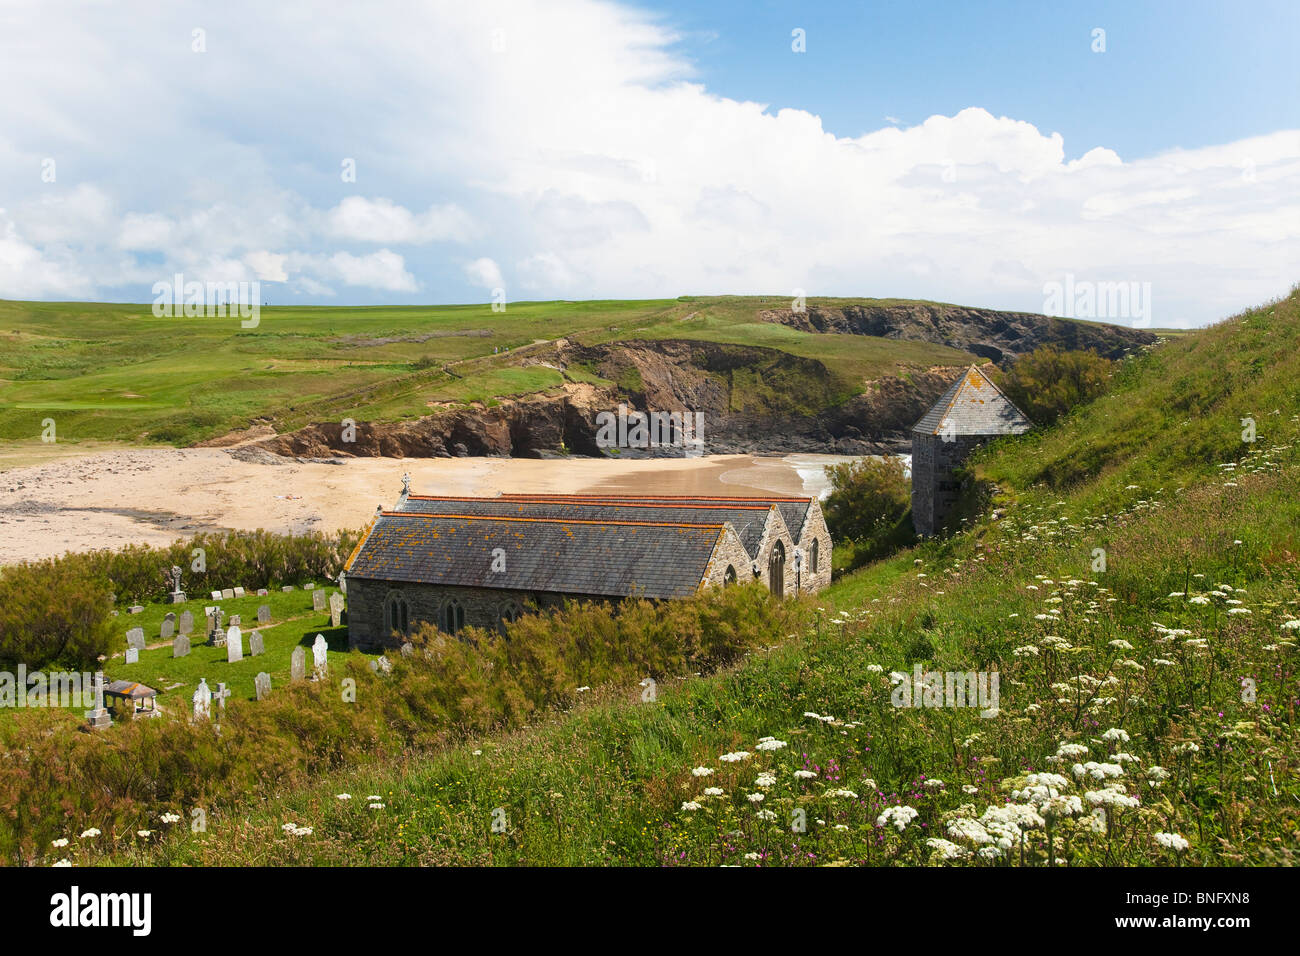 Ruines d'une église, Cornish Riviera, Cornwall, Angleterre Banque D'Images